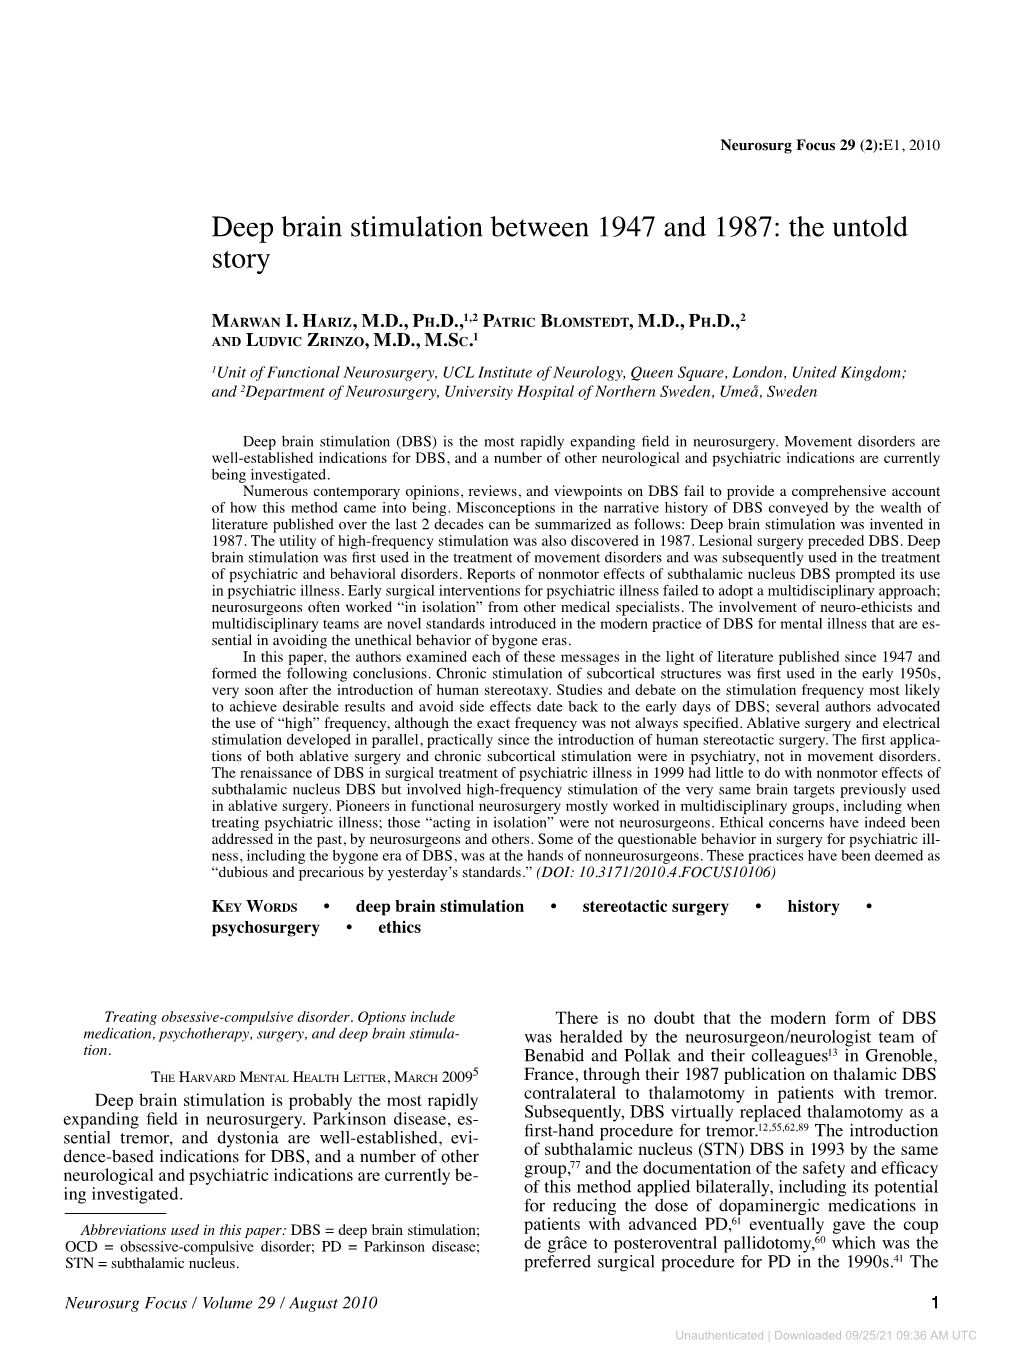 Deep Brain Stimulation Between 1947 and 1987: the Untold Story